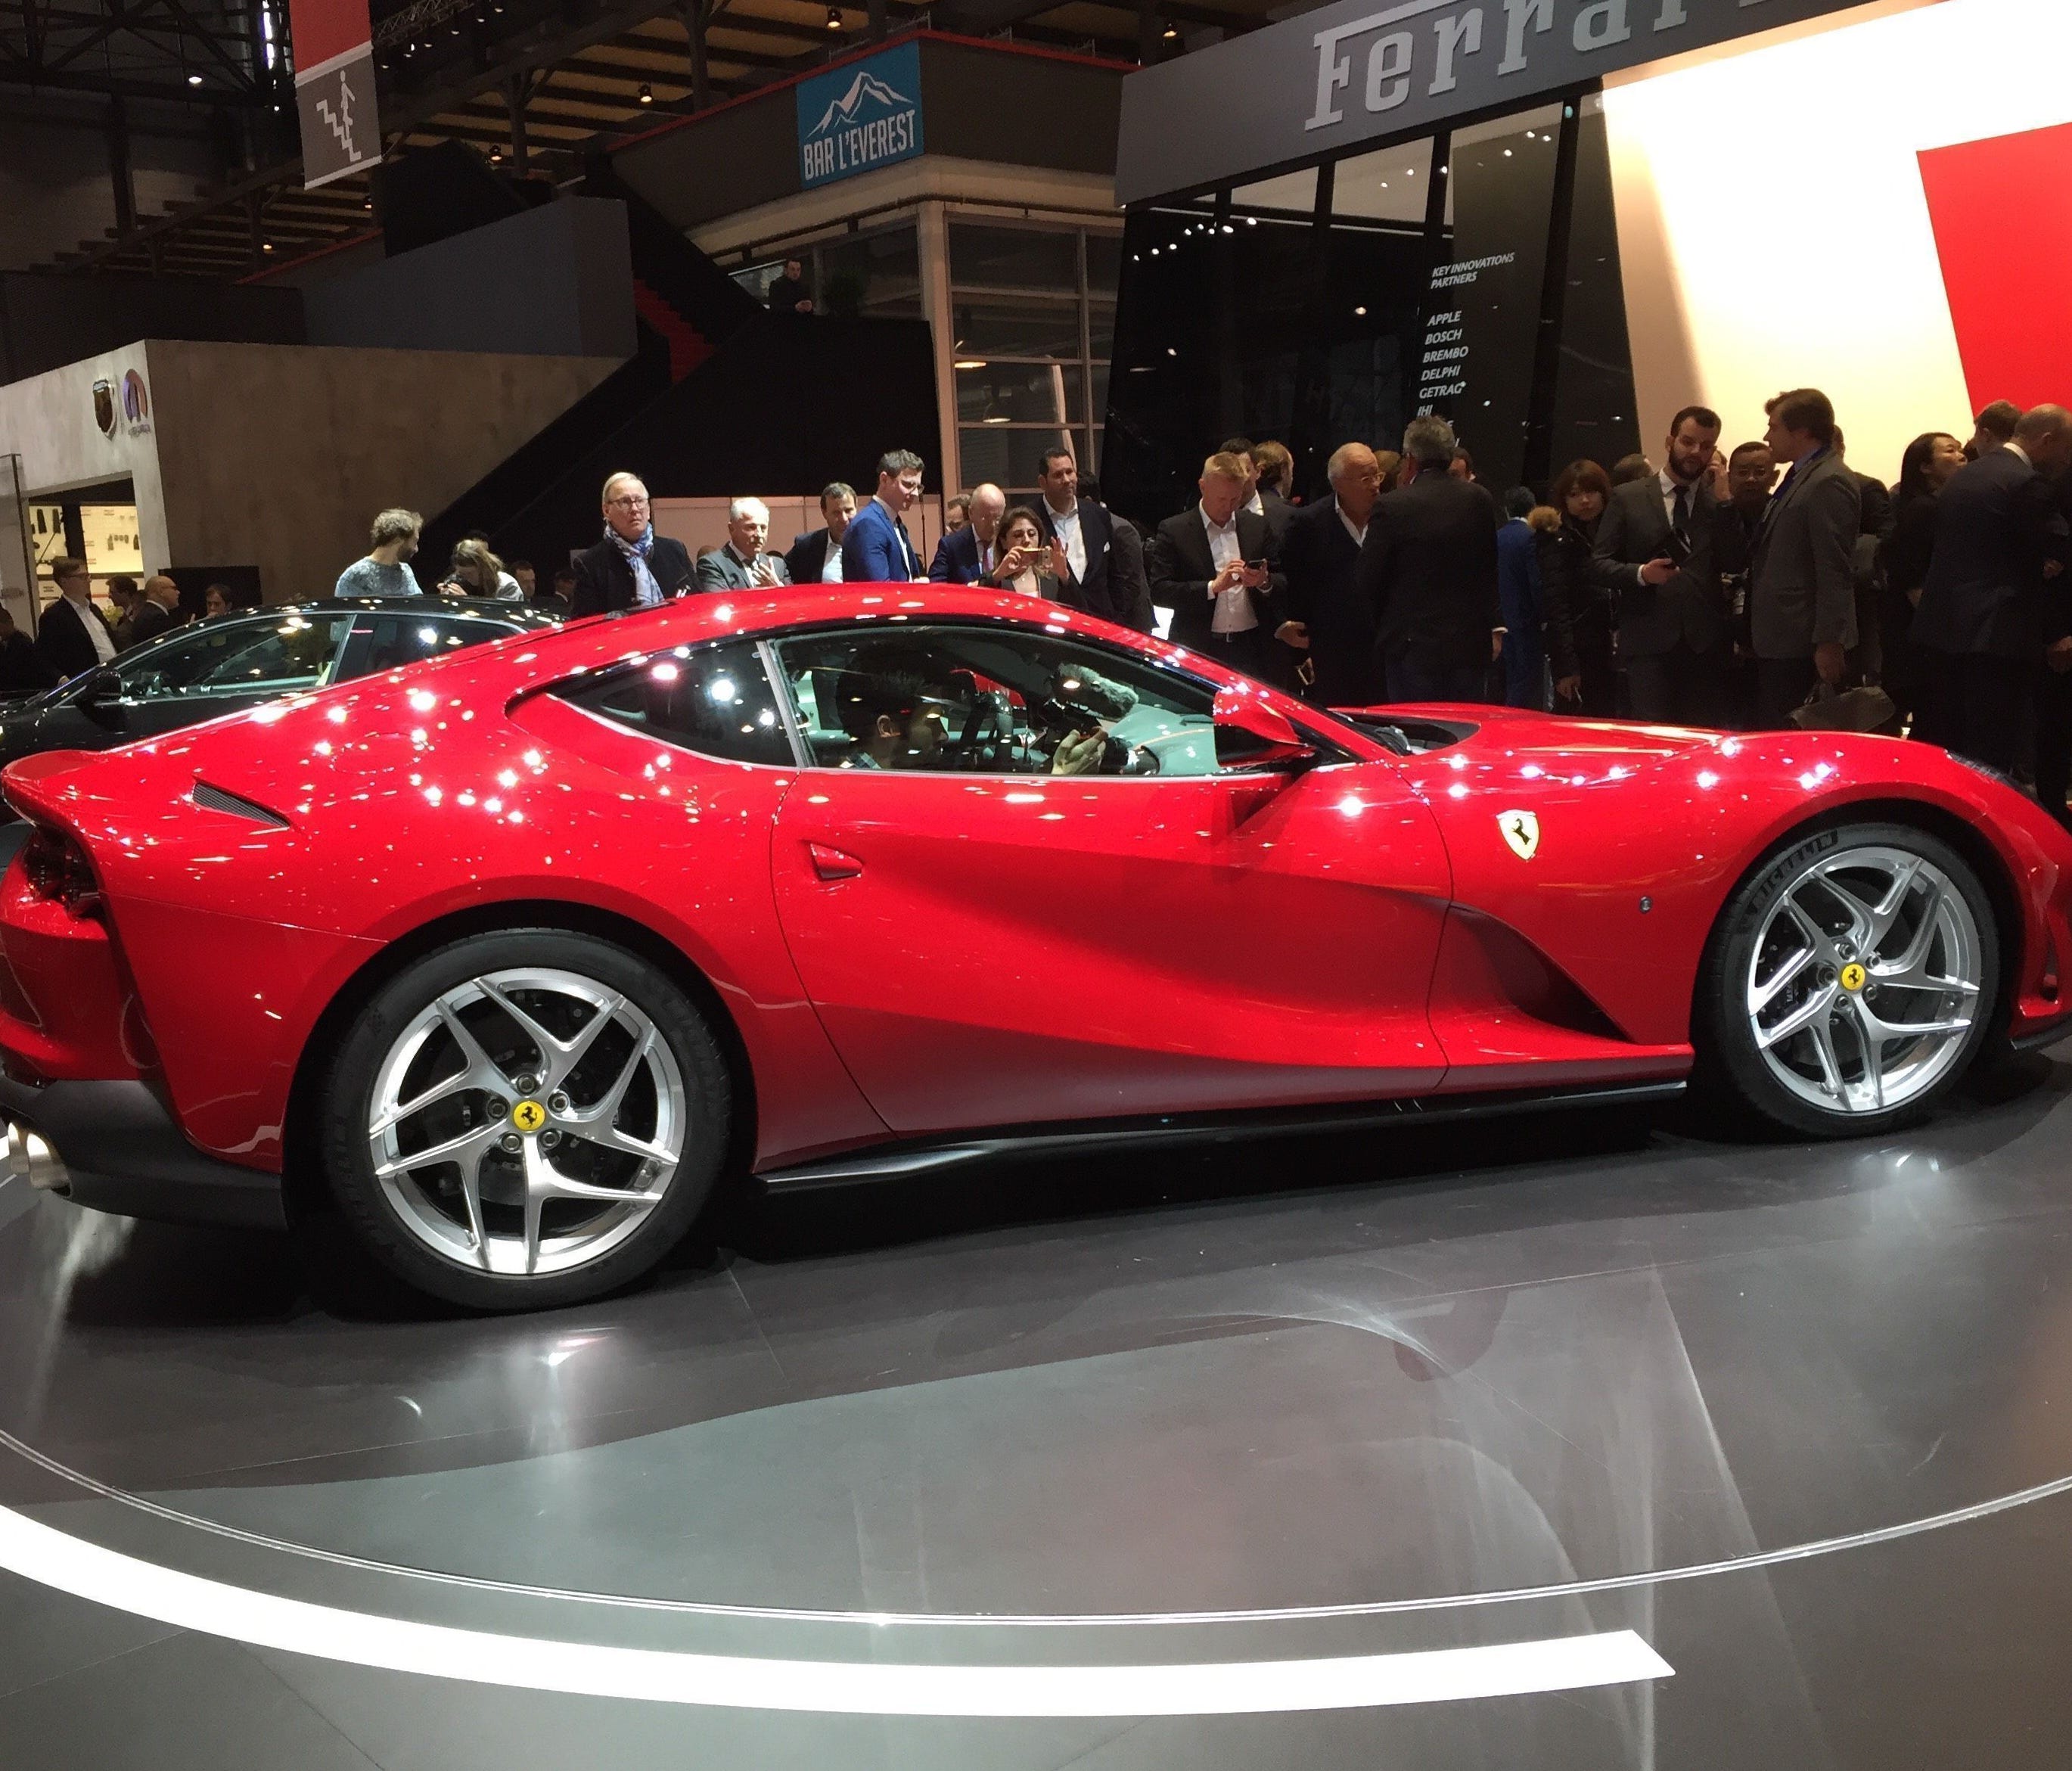 The new Ferrari 812 superfast was unveiled this week at the Geneva International Motor Show.